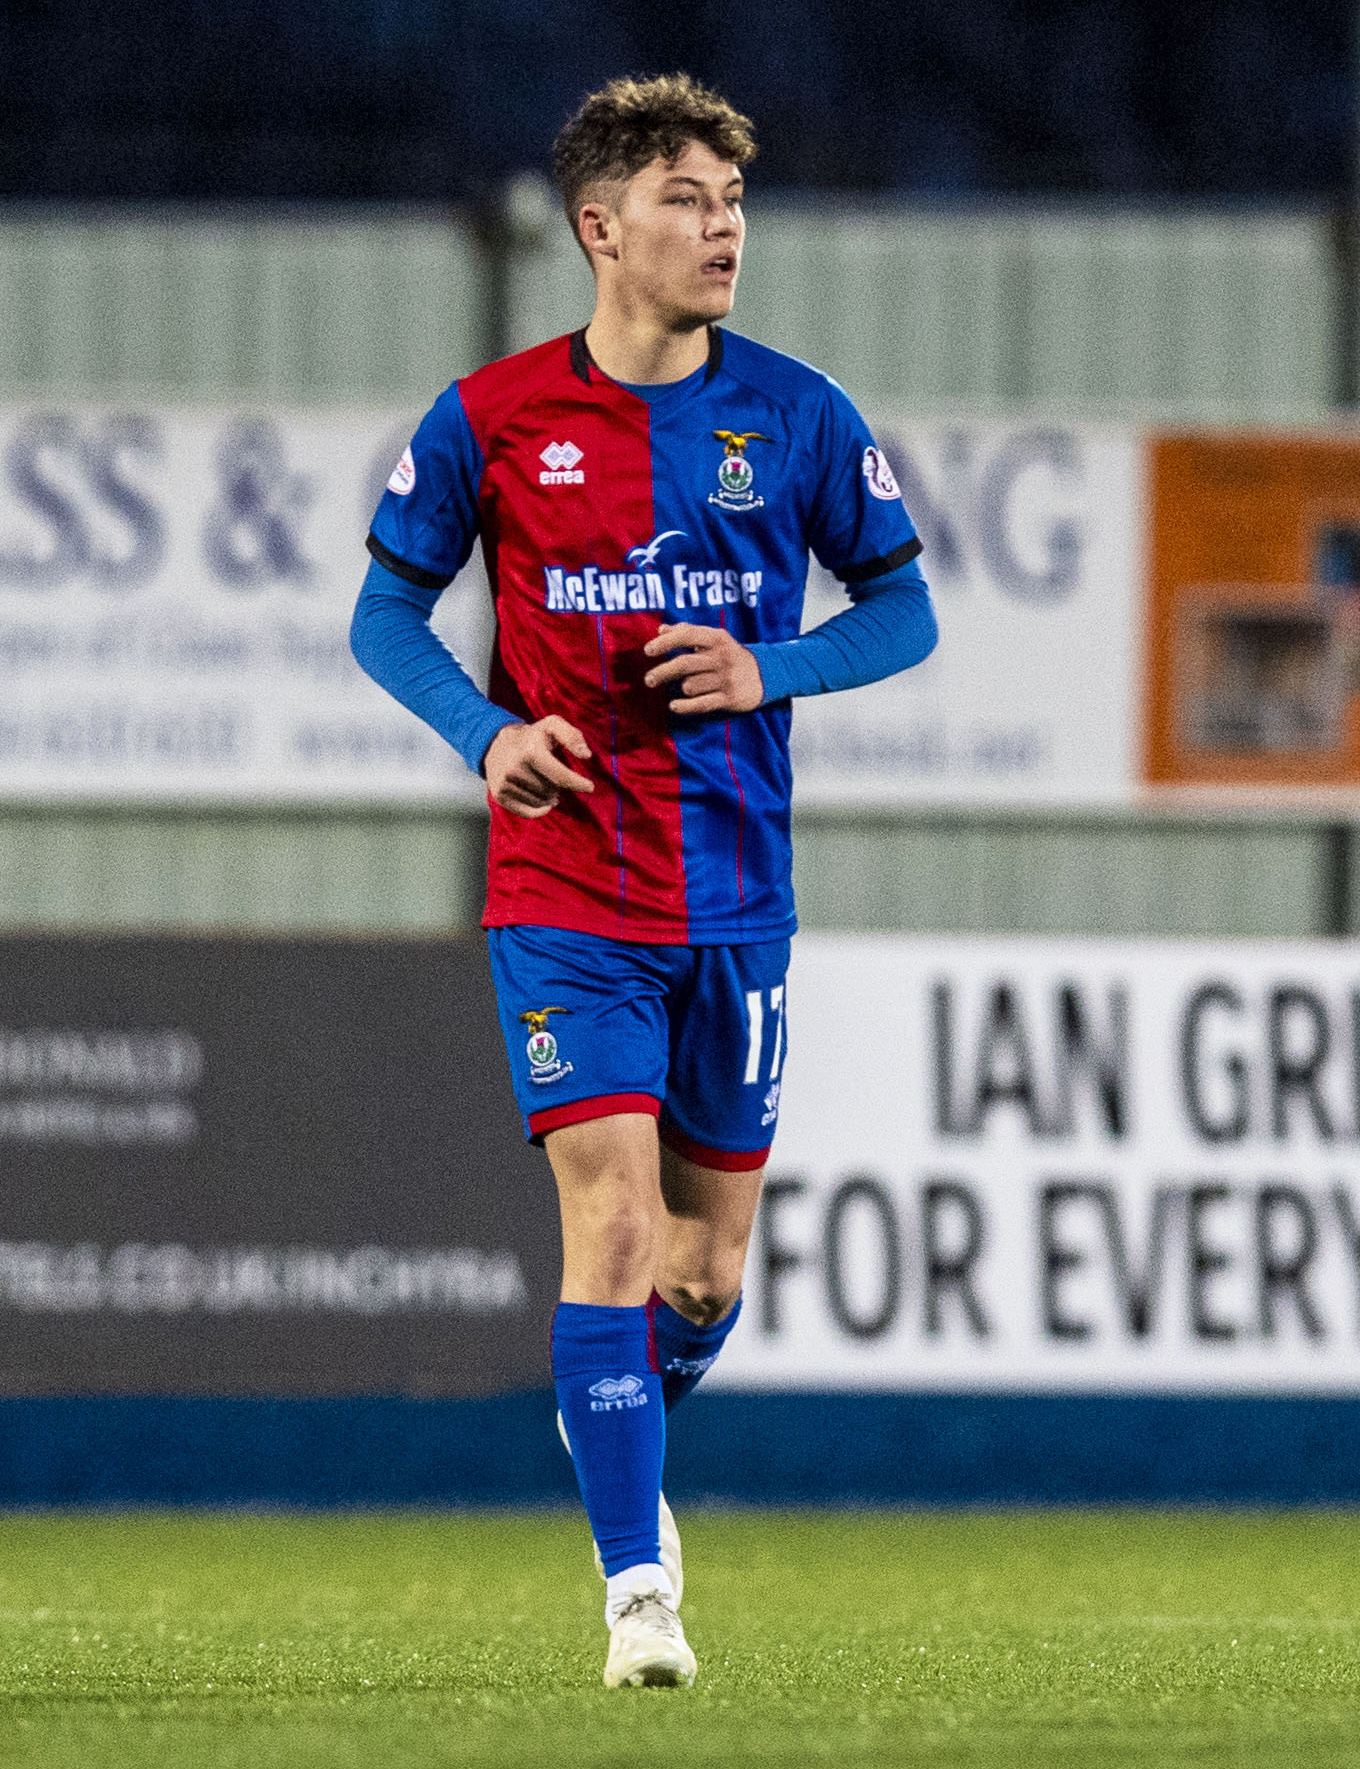 26/01/19 LADBROKES CHAMPIONSHIP
FALKIRK v INVERNESS CT
THE FALKIRK STADIUM - FALKIRK
Anthony McDonald in action for Inverness CT.